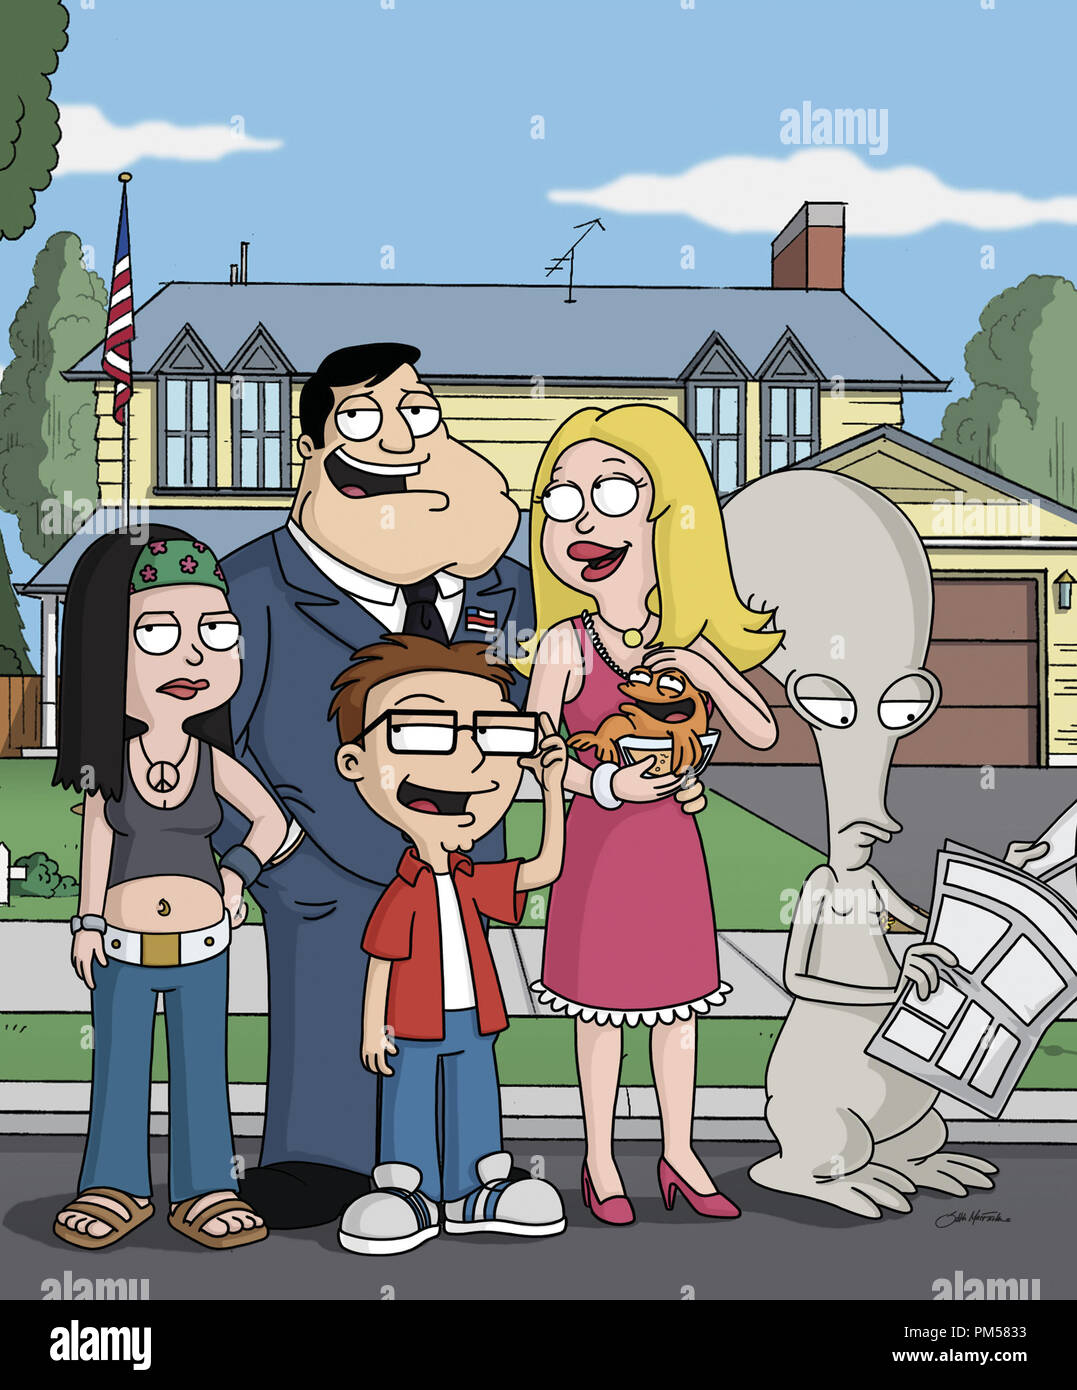 Film Still / Publicity Still from "American Dad!" Hayley, Stan Smith, Steve, Rodger, Francine, Klaus 2005   File Reference # 307361427THA  For Editorial Use Only -  All Rights Reserved Stock Photo